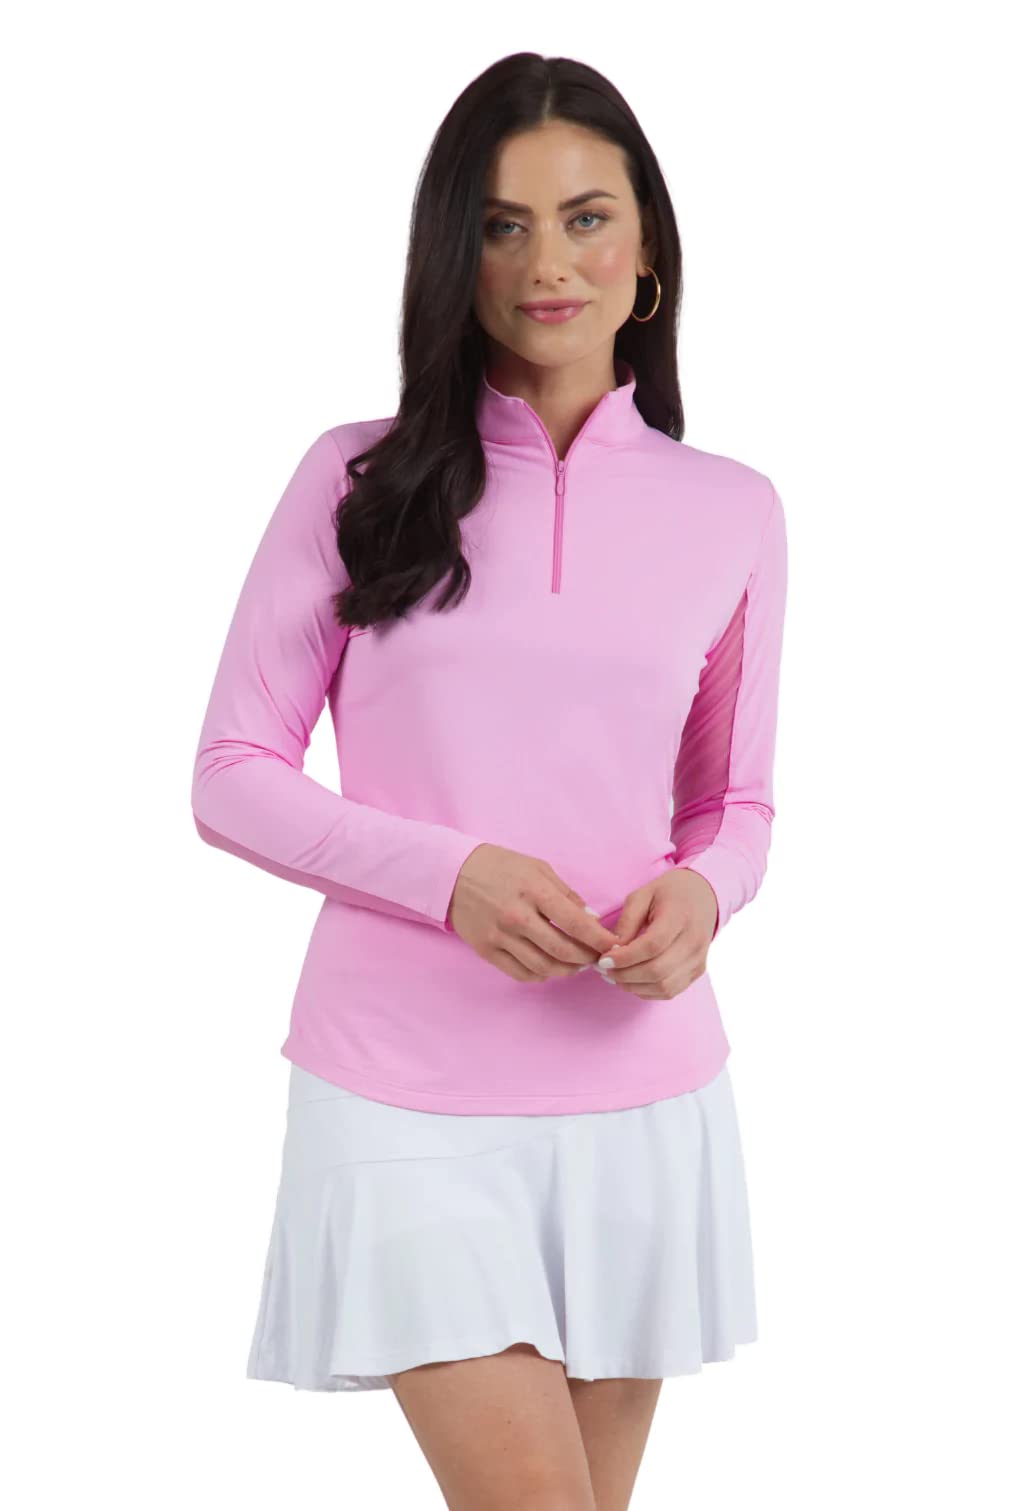 IBKUL Athleisure Wear Sun Protective UPF 50+ Icefil Cooling Tech Long Sleeve Mock Neck Top with Under Arm Mesh 80000 Seafoam Solid M